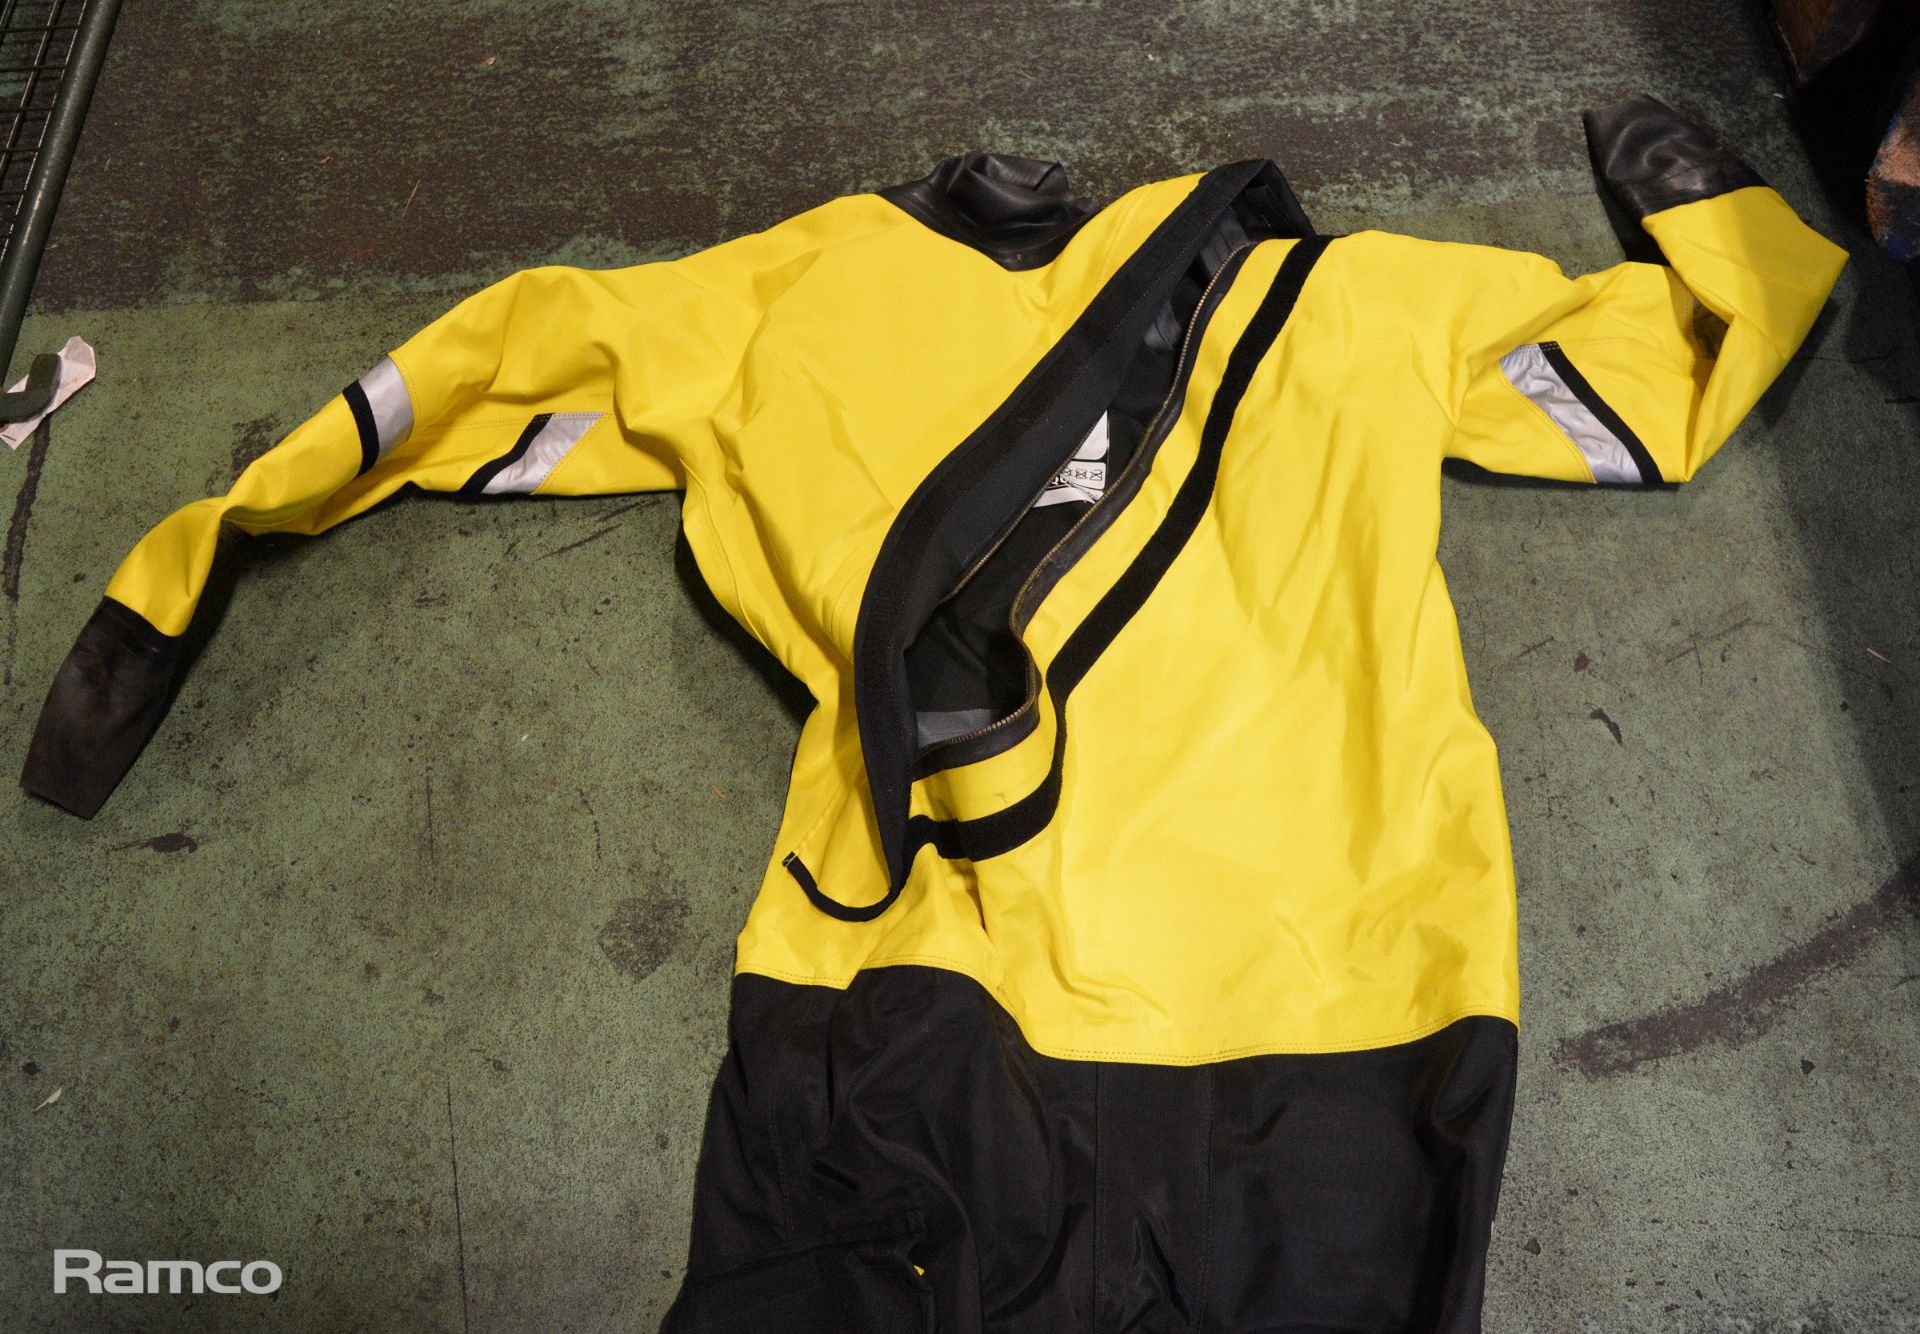 5x Fire Rescue Dry Suit - X Large - Image 3 of 3